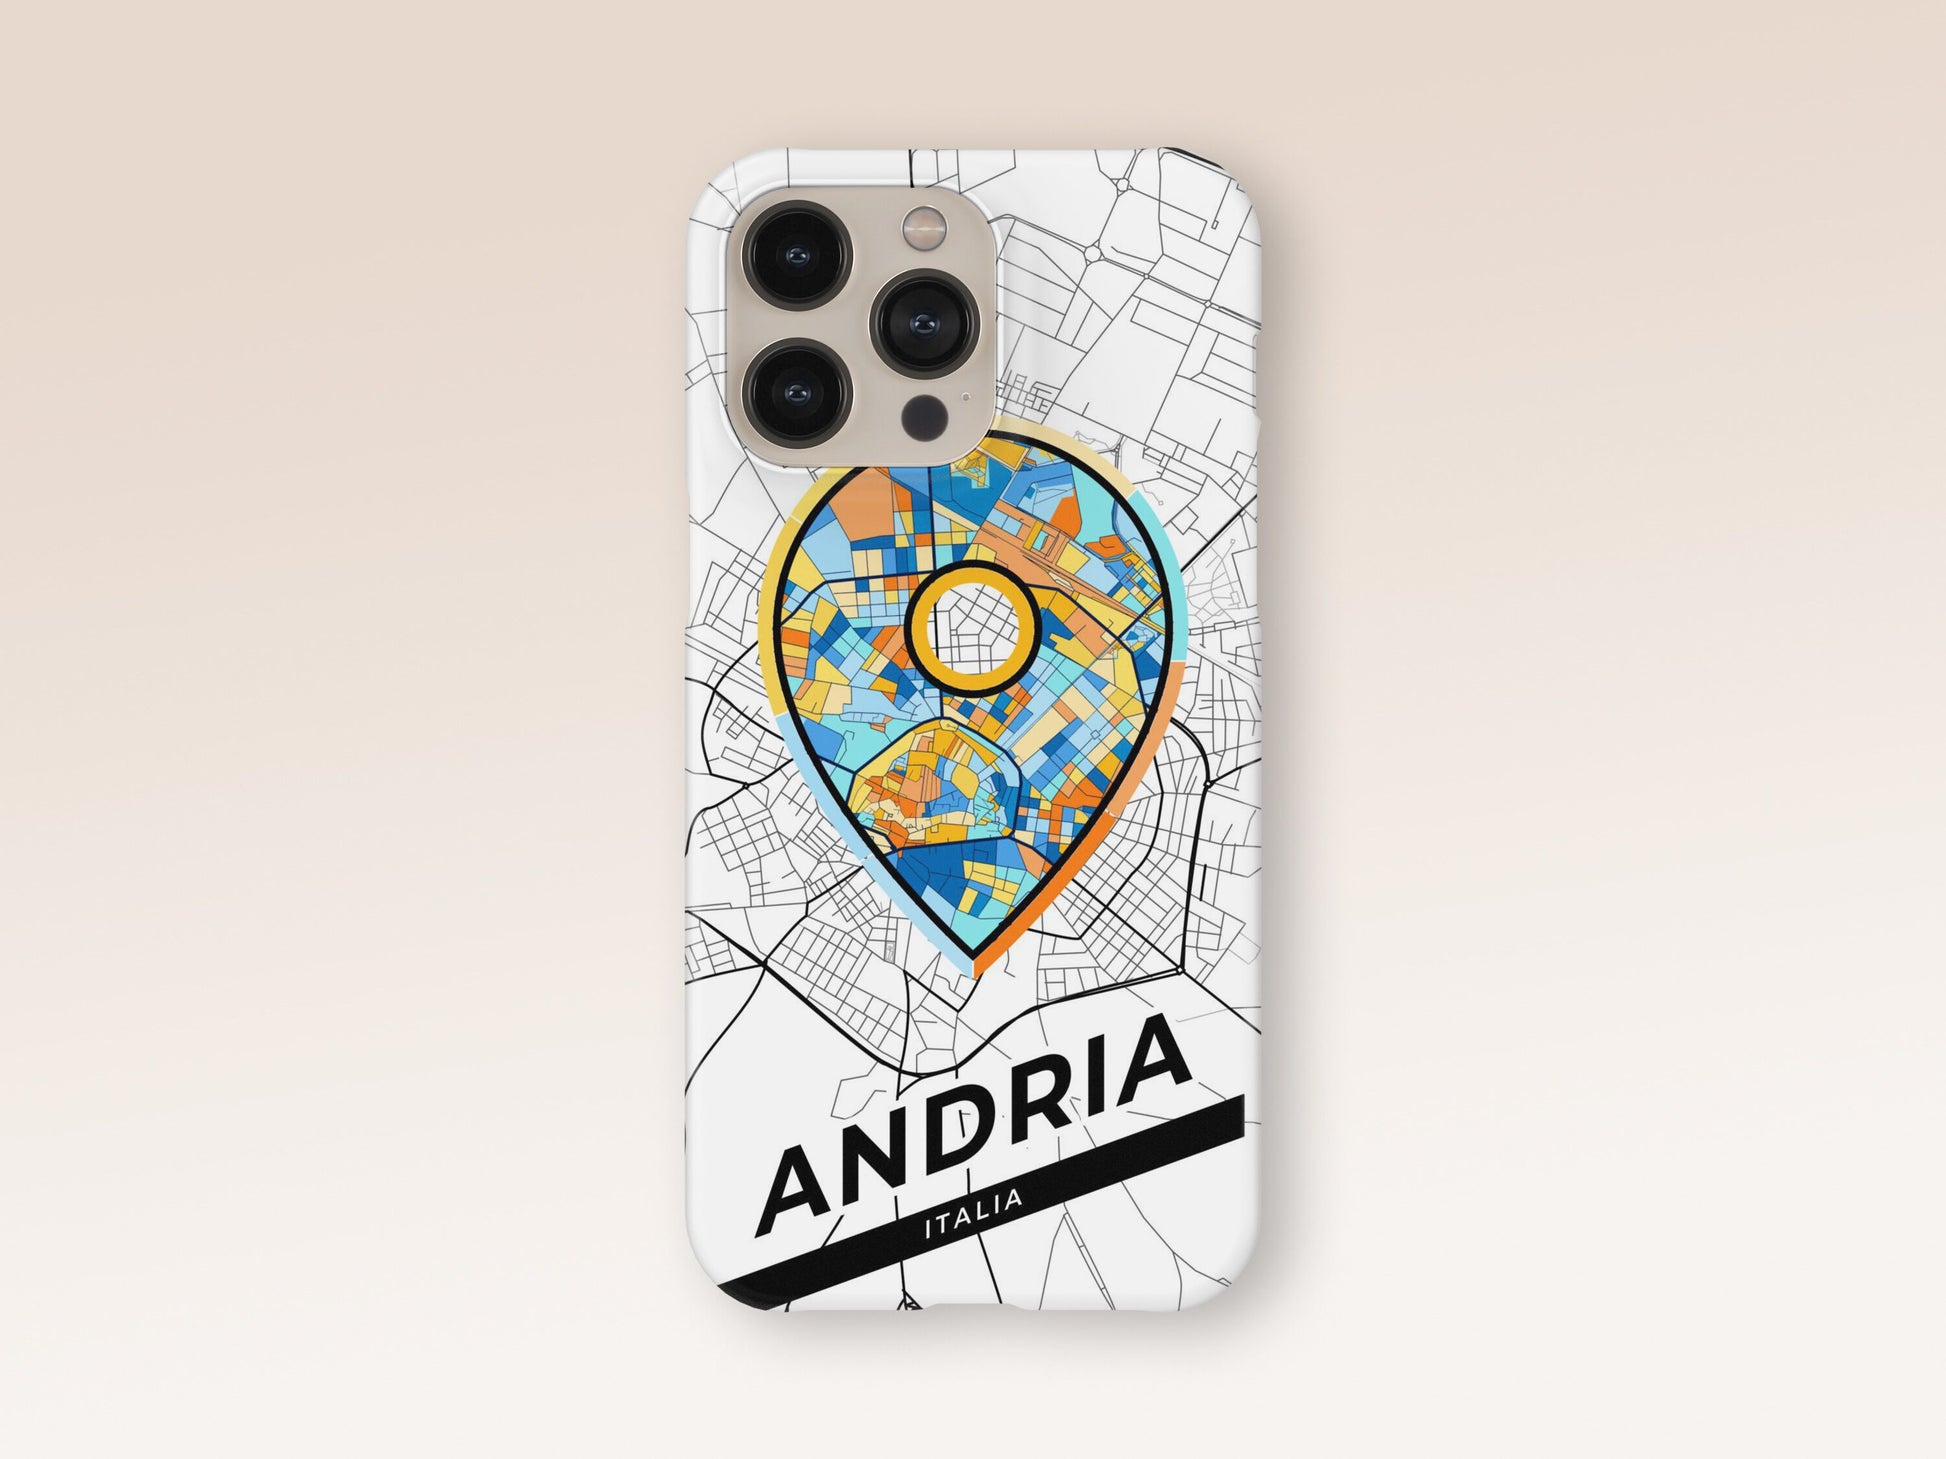 Andria Italy slim phone case with colorful icon. Birthday, wedding or housewarming gift. Couple match cases. 1